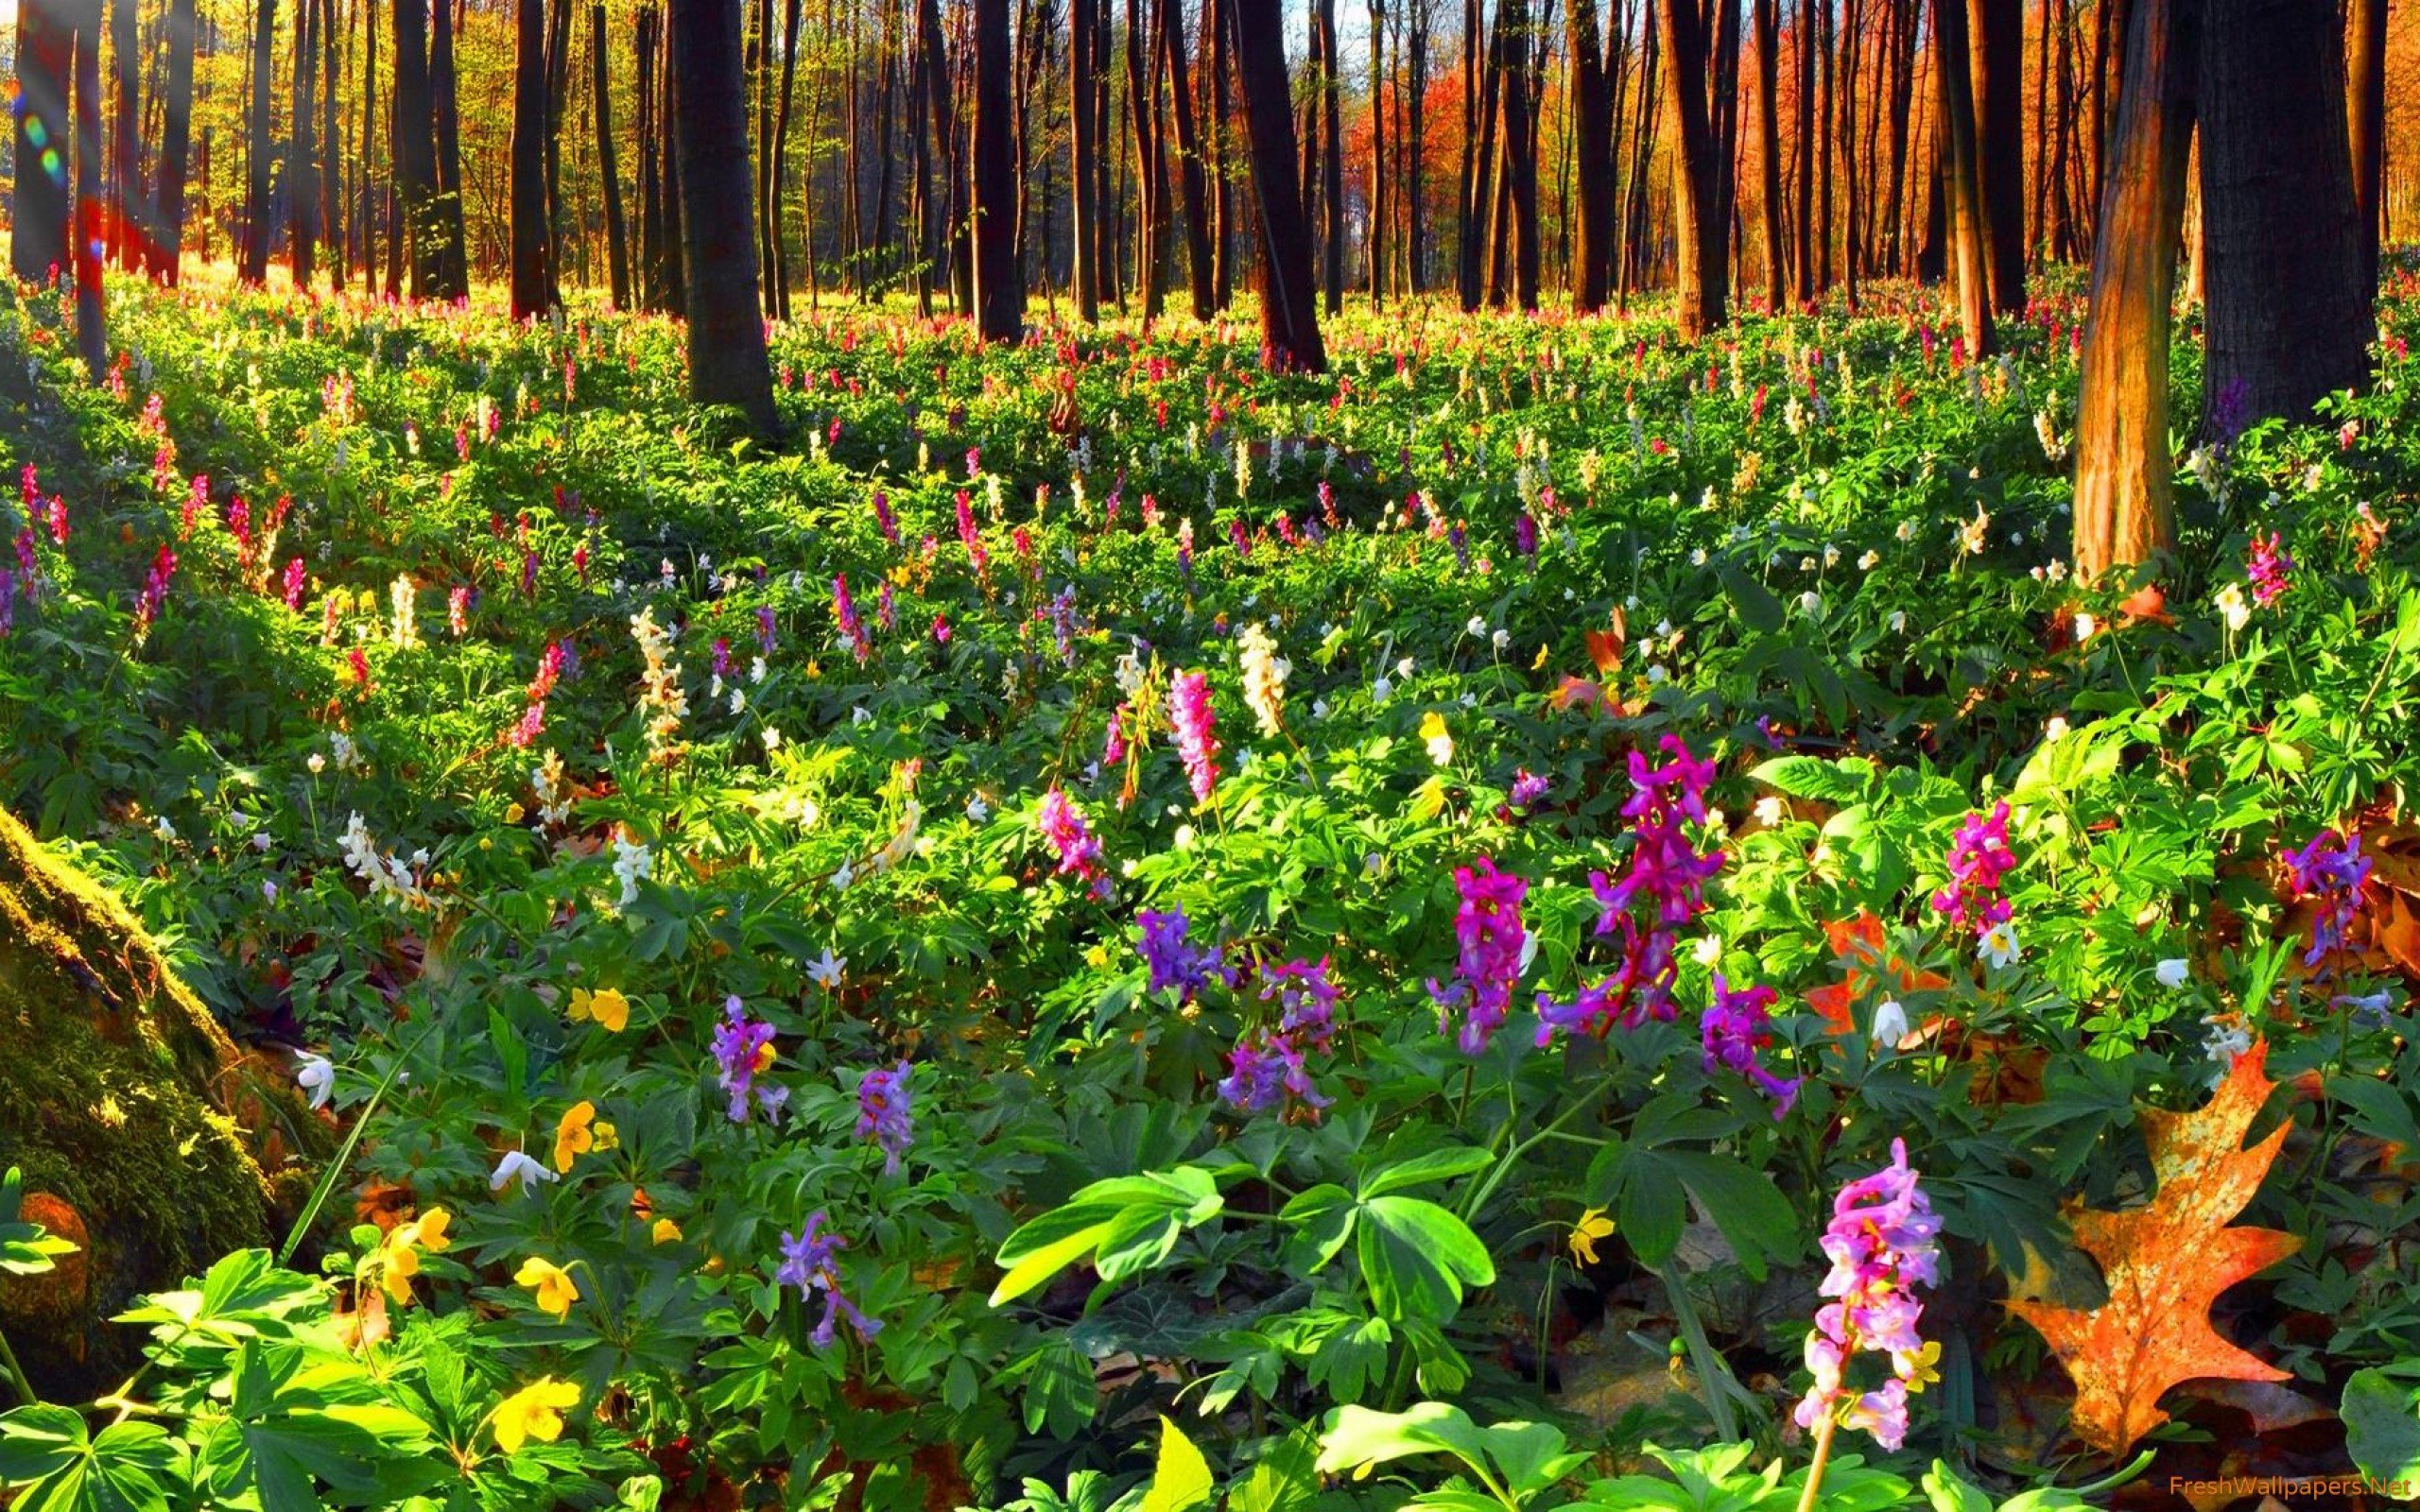 Summer flowers in the forest wallpaper